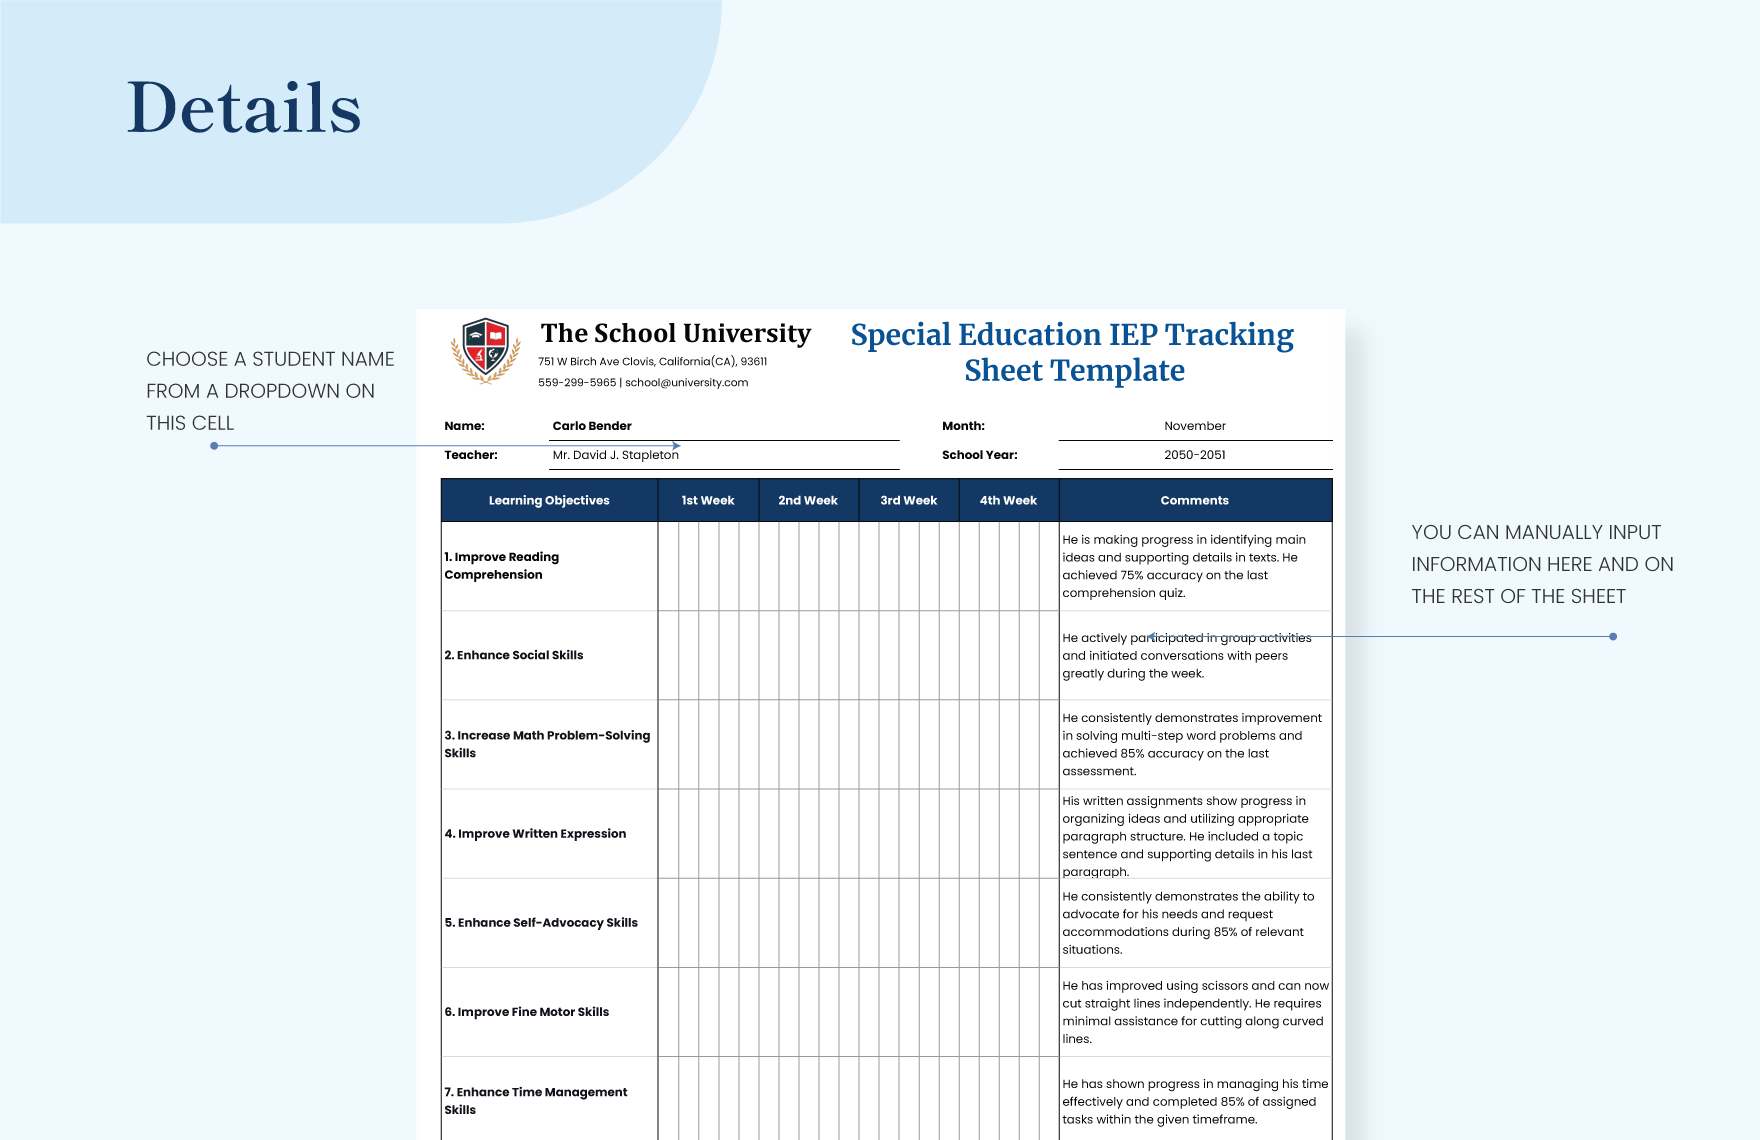 Special Education IEP Tracking Sheet Template